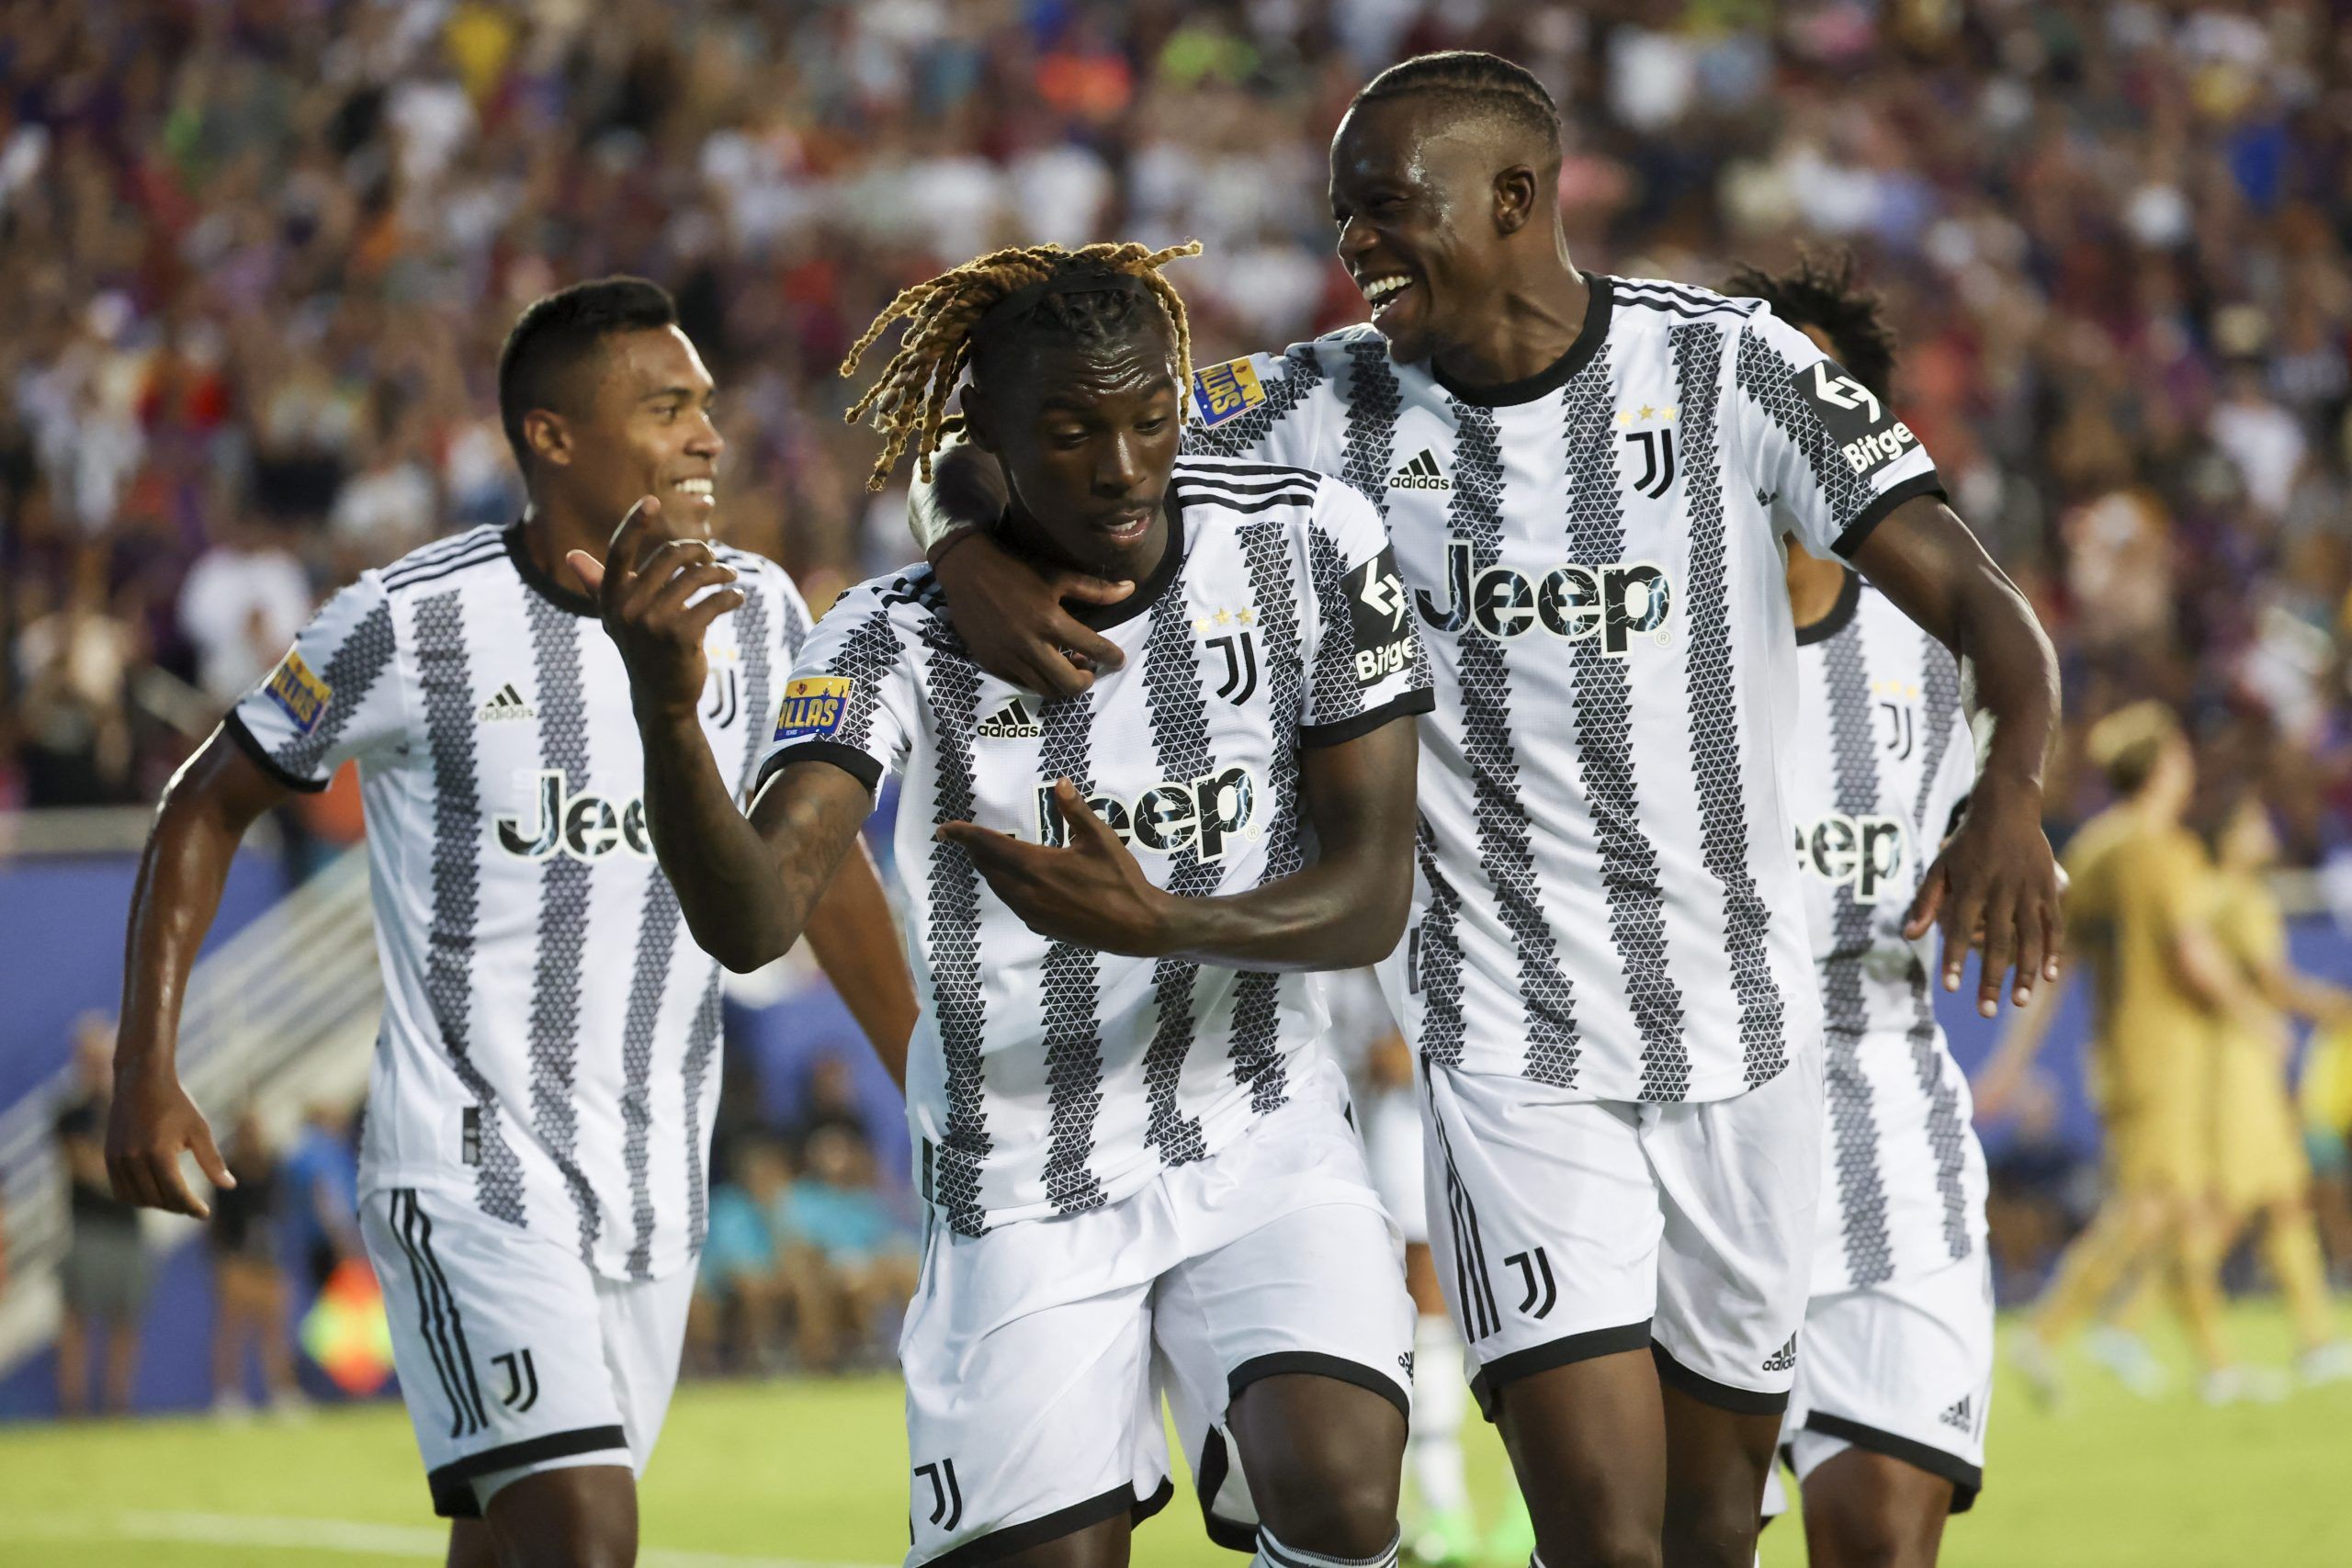 Jul 26, 2022; Dallas, Texas, USA;  Juventus forward Moise Kean (18) celebrates with teammates after scoring a goal during the second half against FC Barcelona at the Cotton Bowl. Mandatory Credit: Kevin Jairaj-USA TODAY Sports